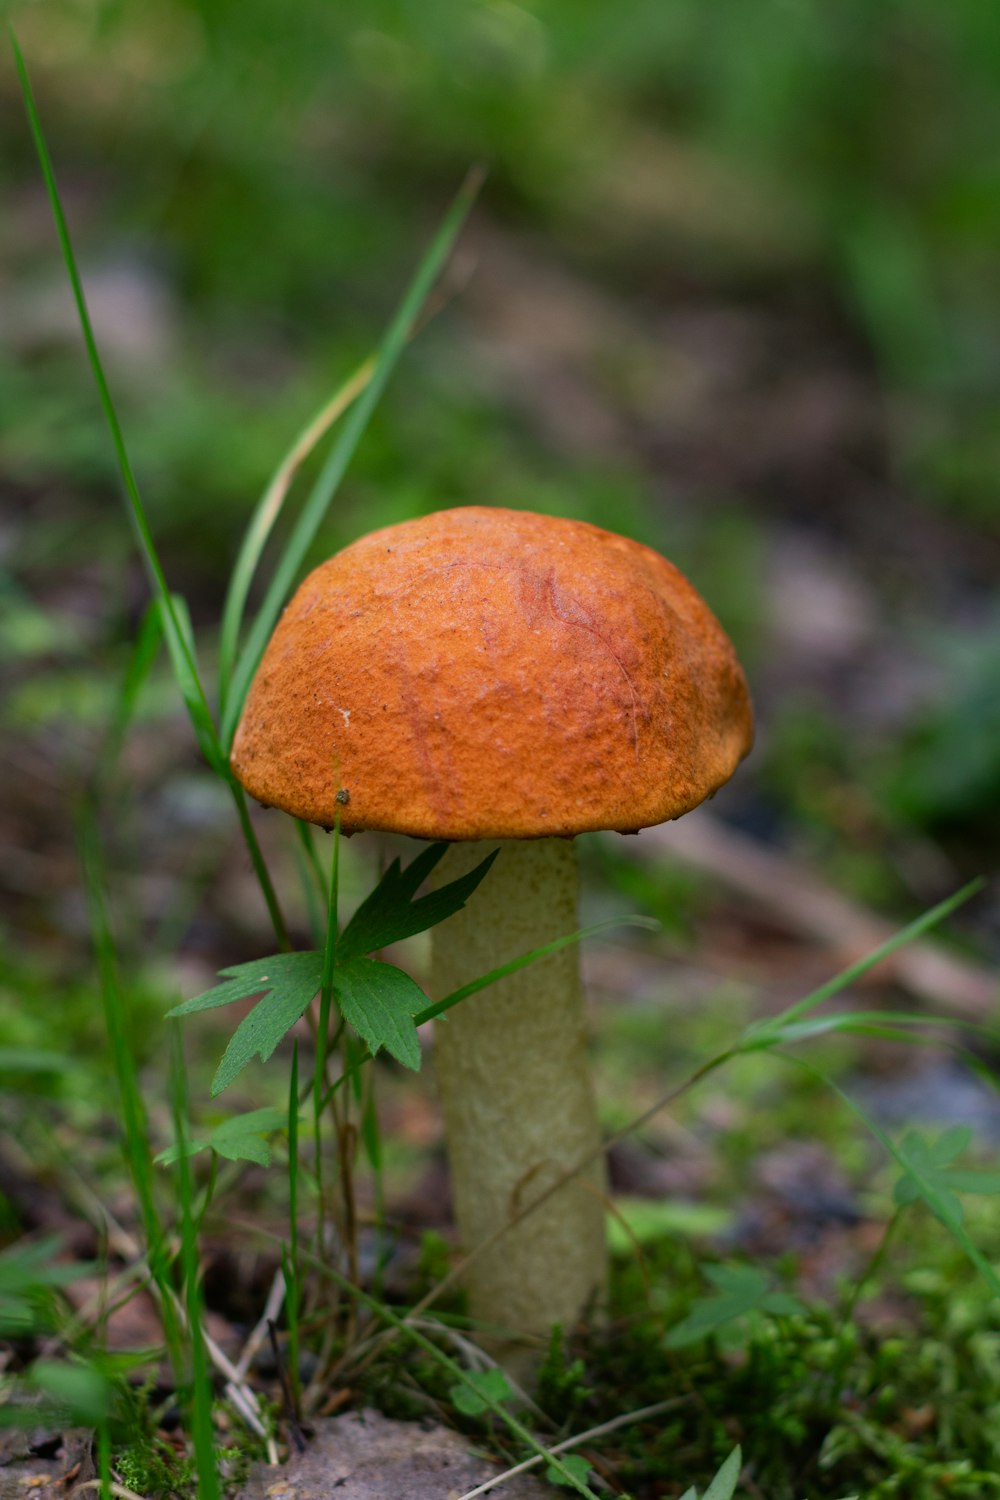 a close up of a small orange mushroom on the ground